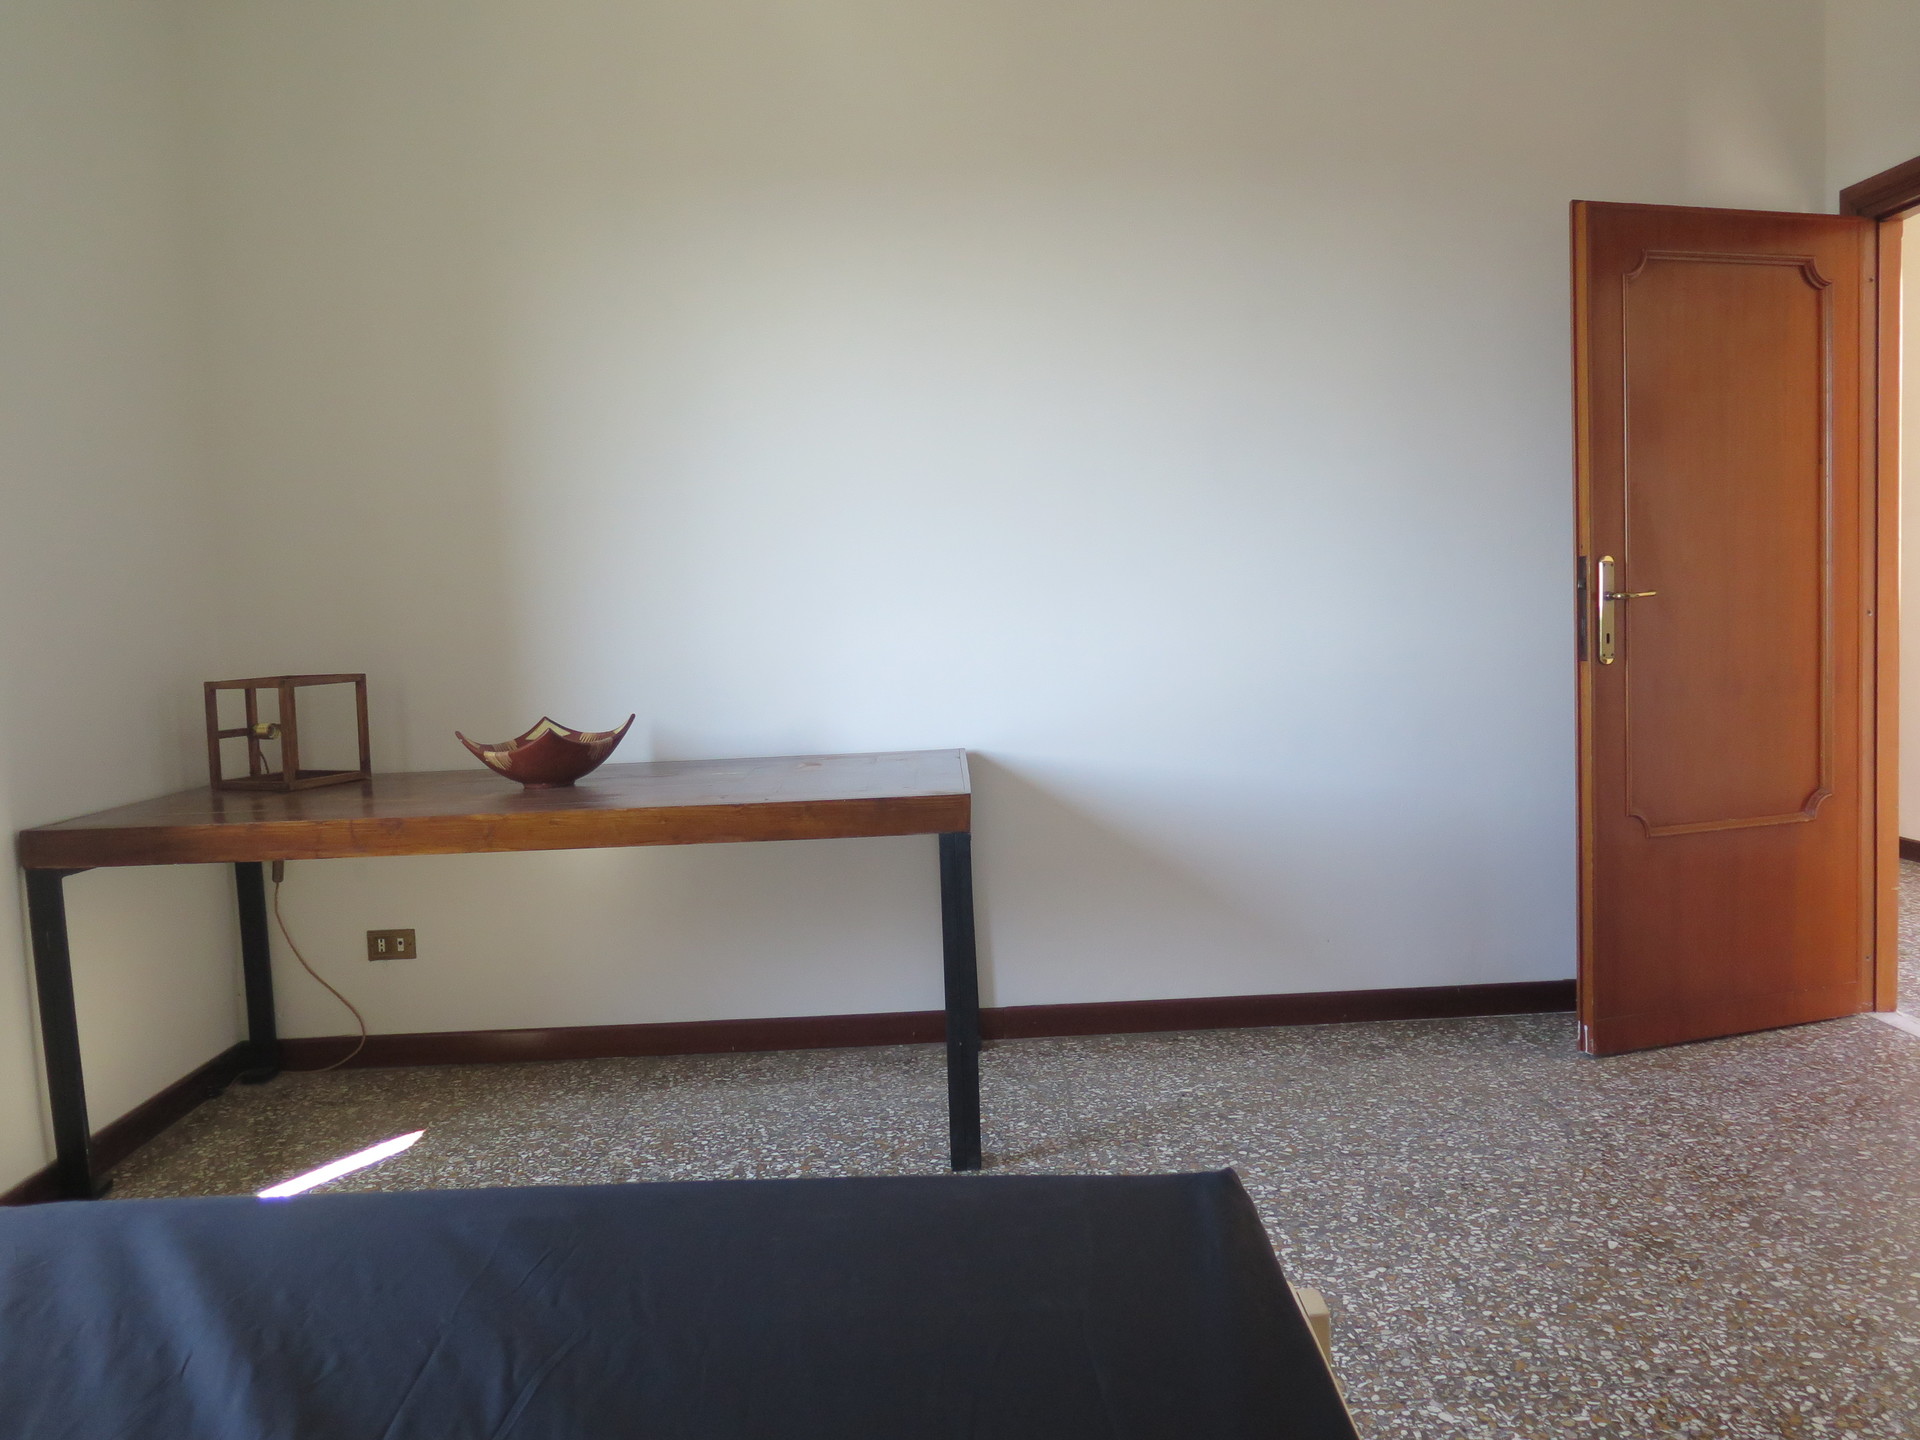 2 Double 1 Single Bedroom Flat Rent For Students